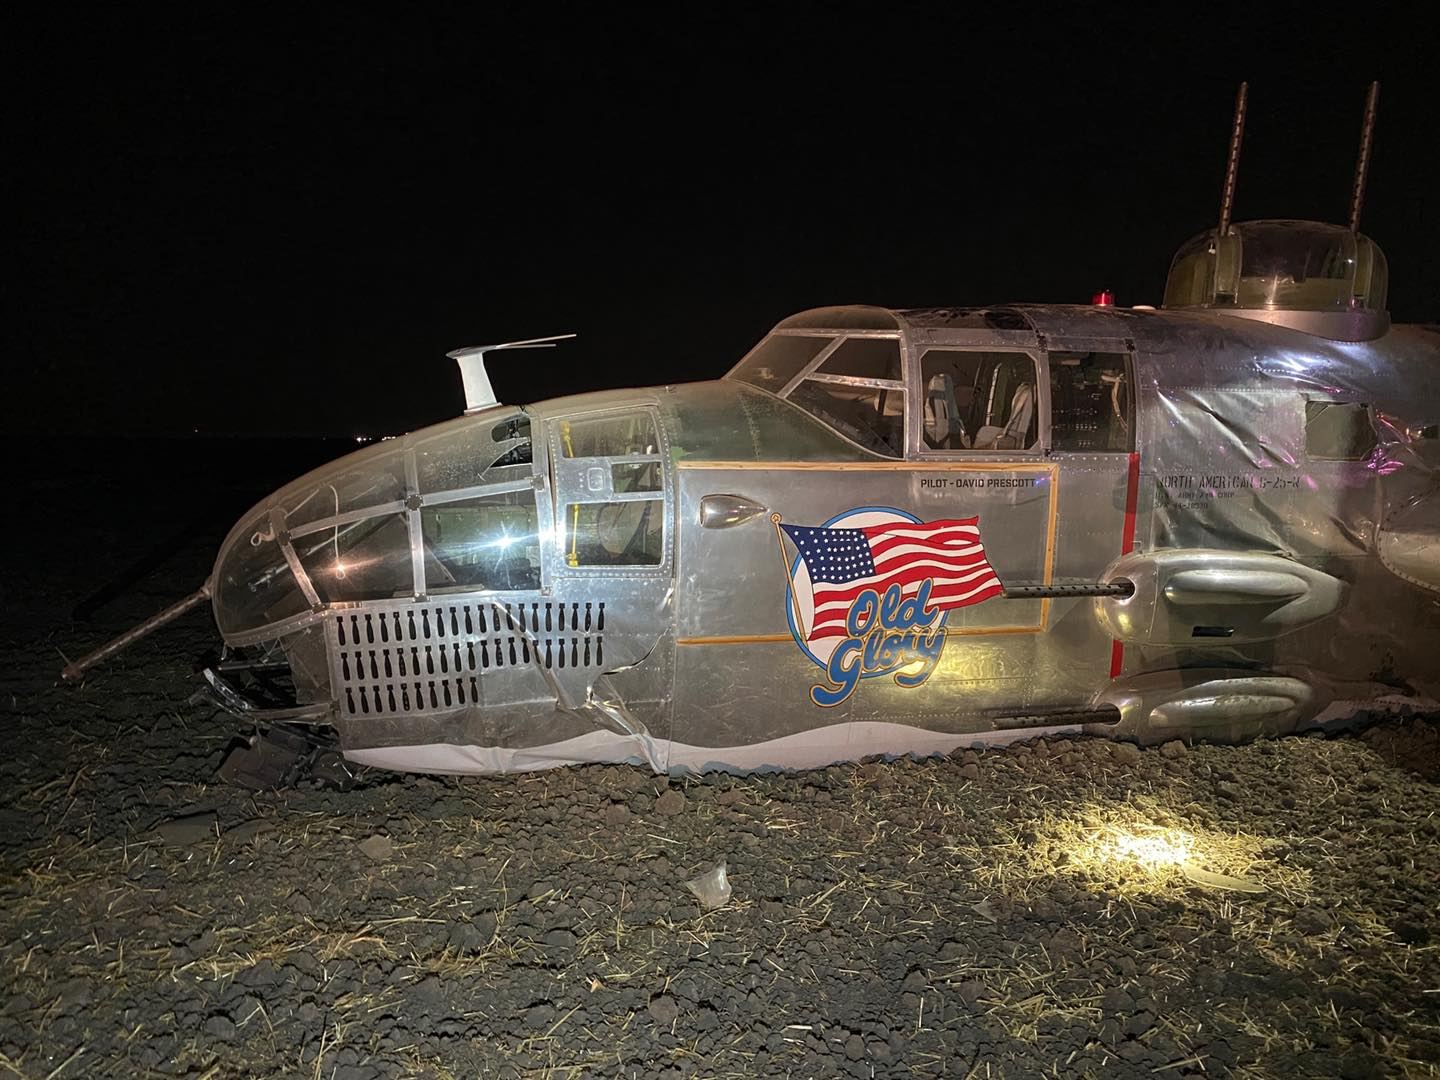 The B-25 flying as Old Glory crashed in California.